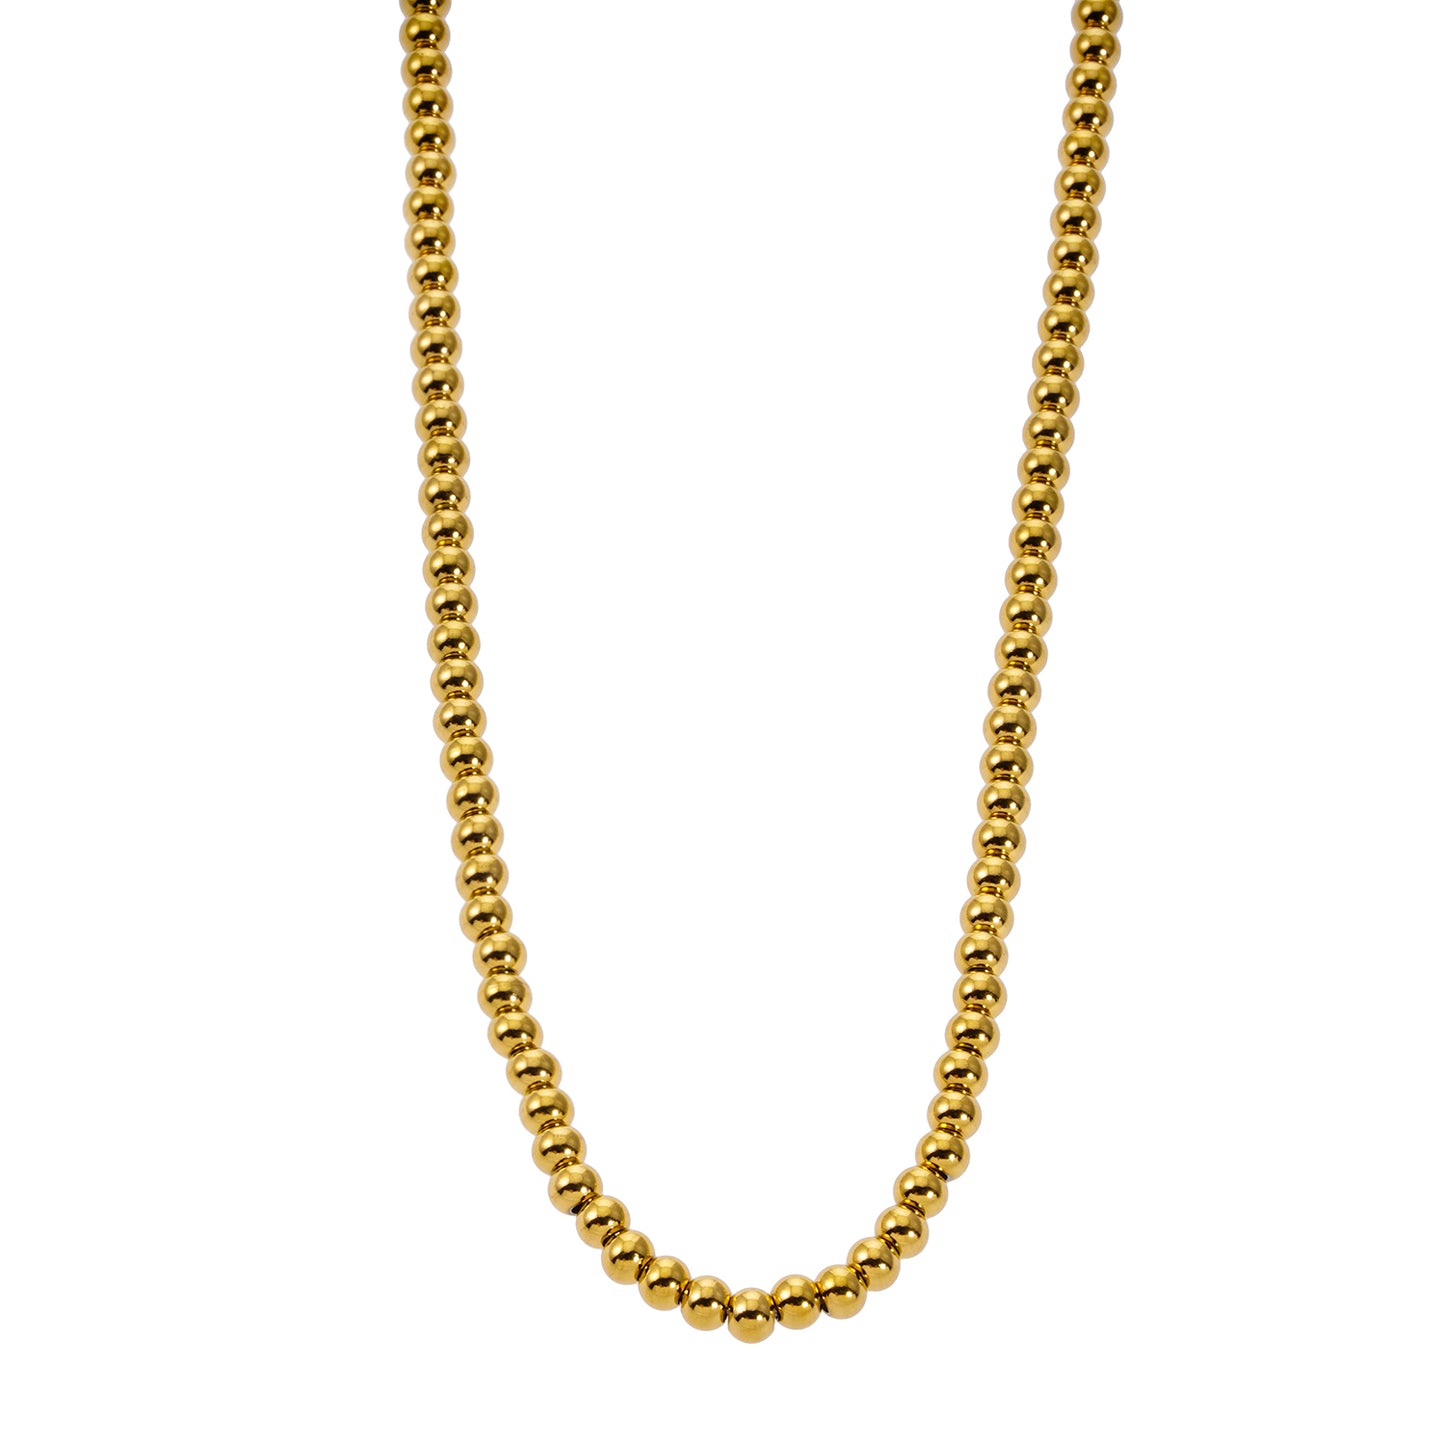 Style RIKKO 4322: Ball-Beads Contemporary Chain Necklace.